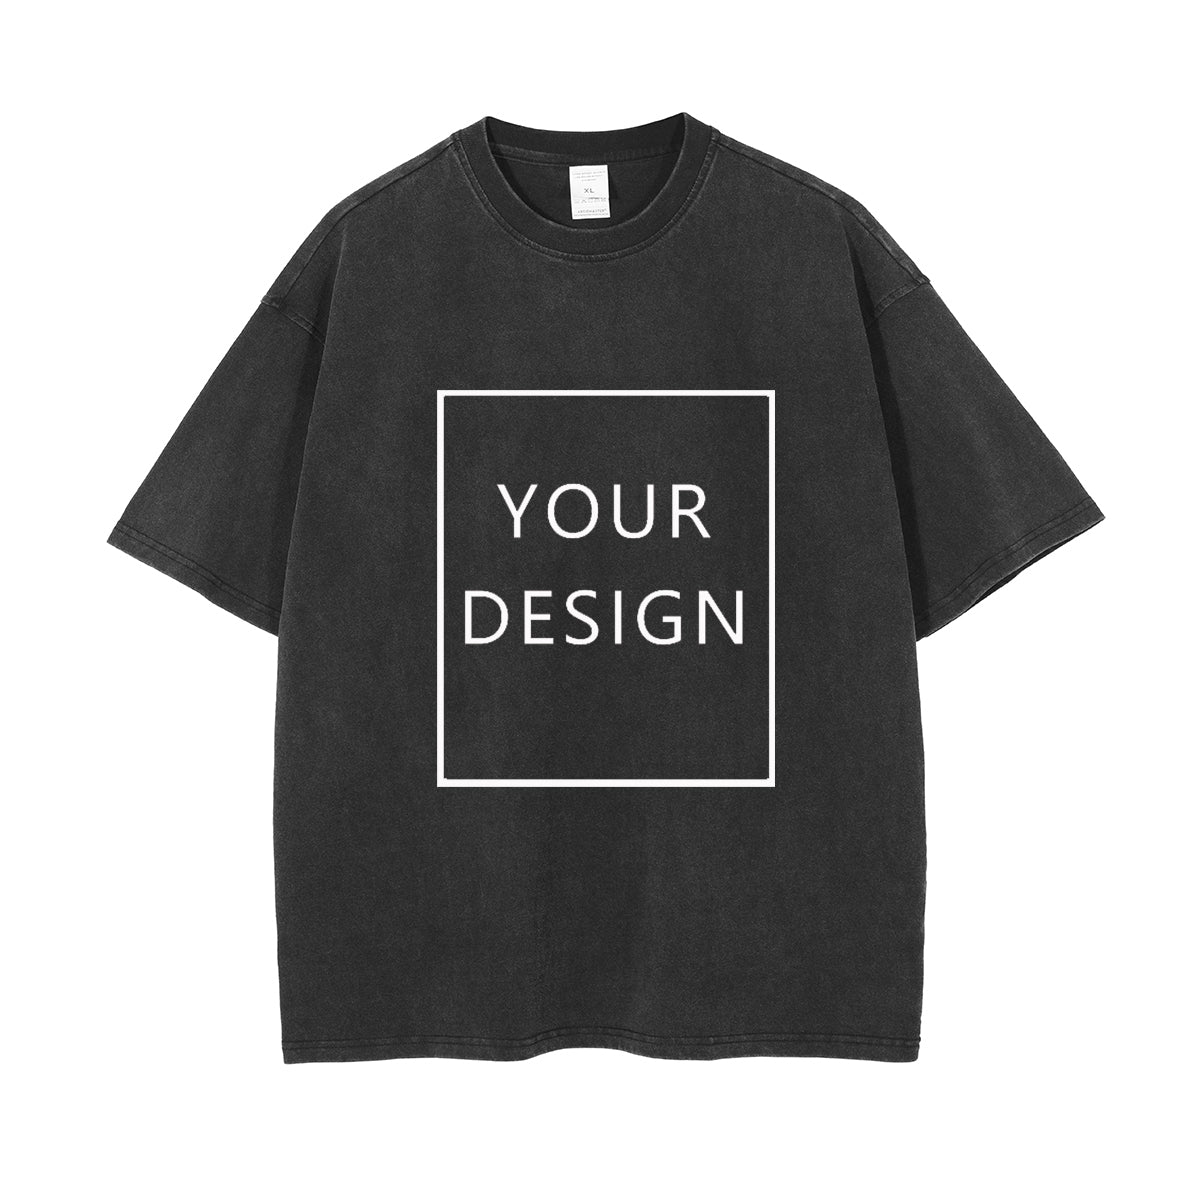 Sidiou Group Factory Wholesale 250g Thick Washed And Worn Men's T-Shirts DIY Brand Logo Picture Design Your Own T-shirts Online